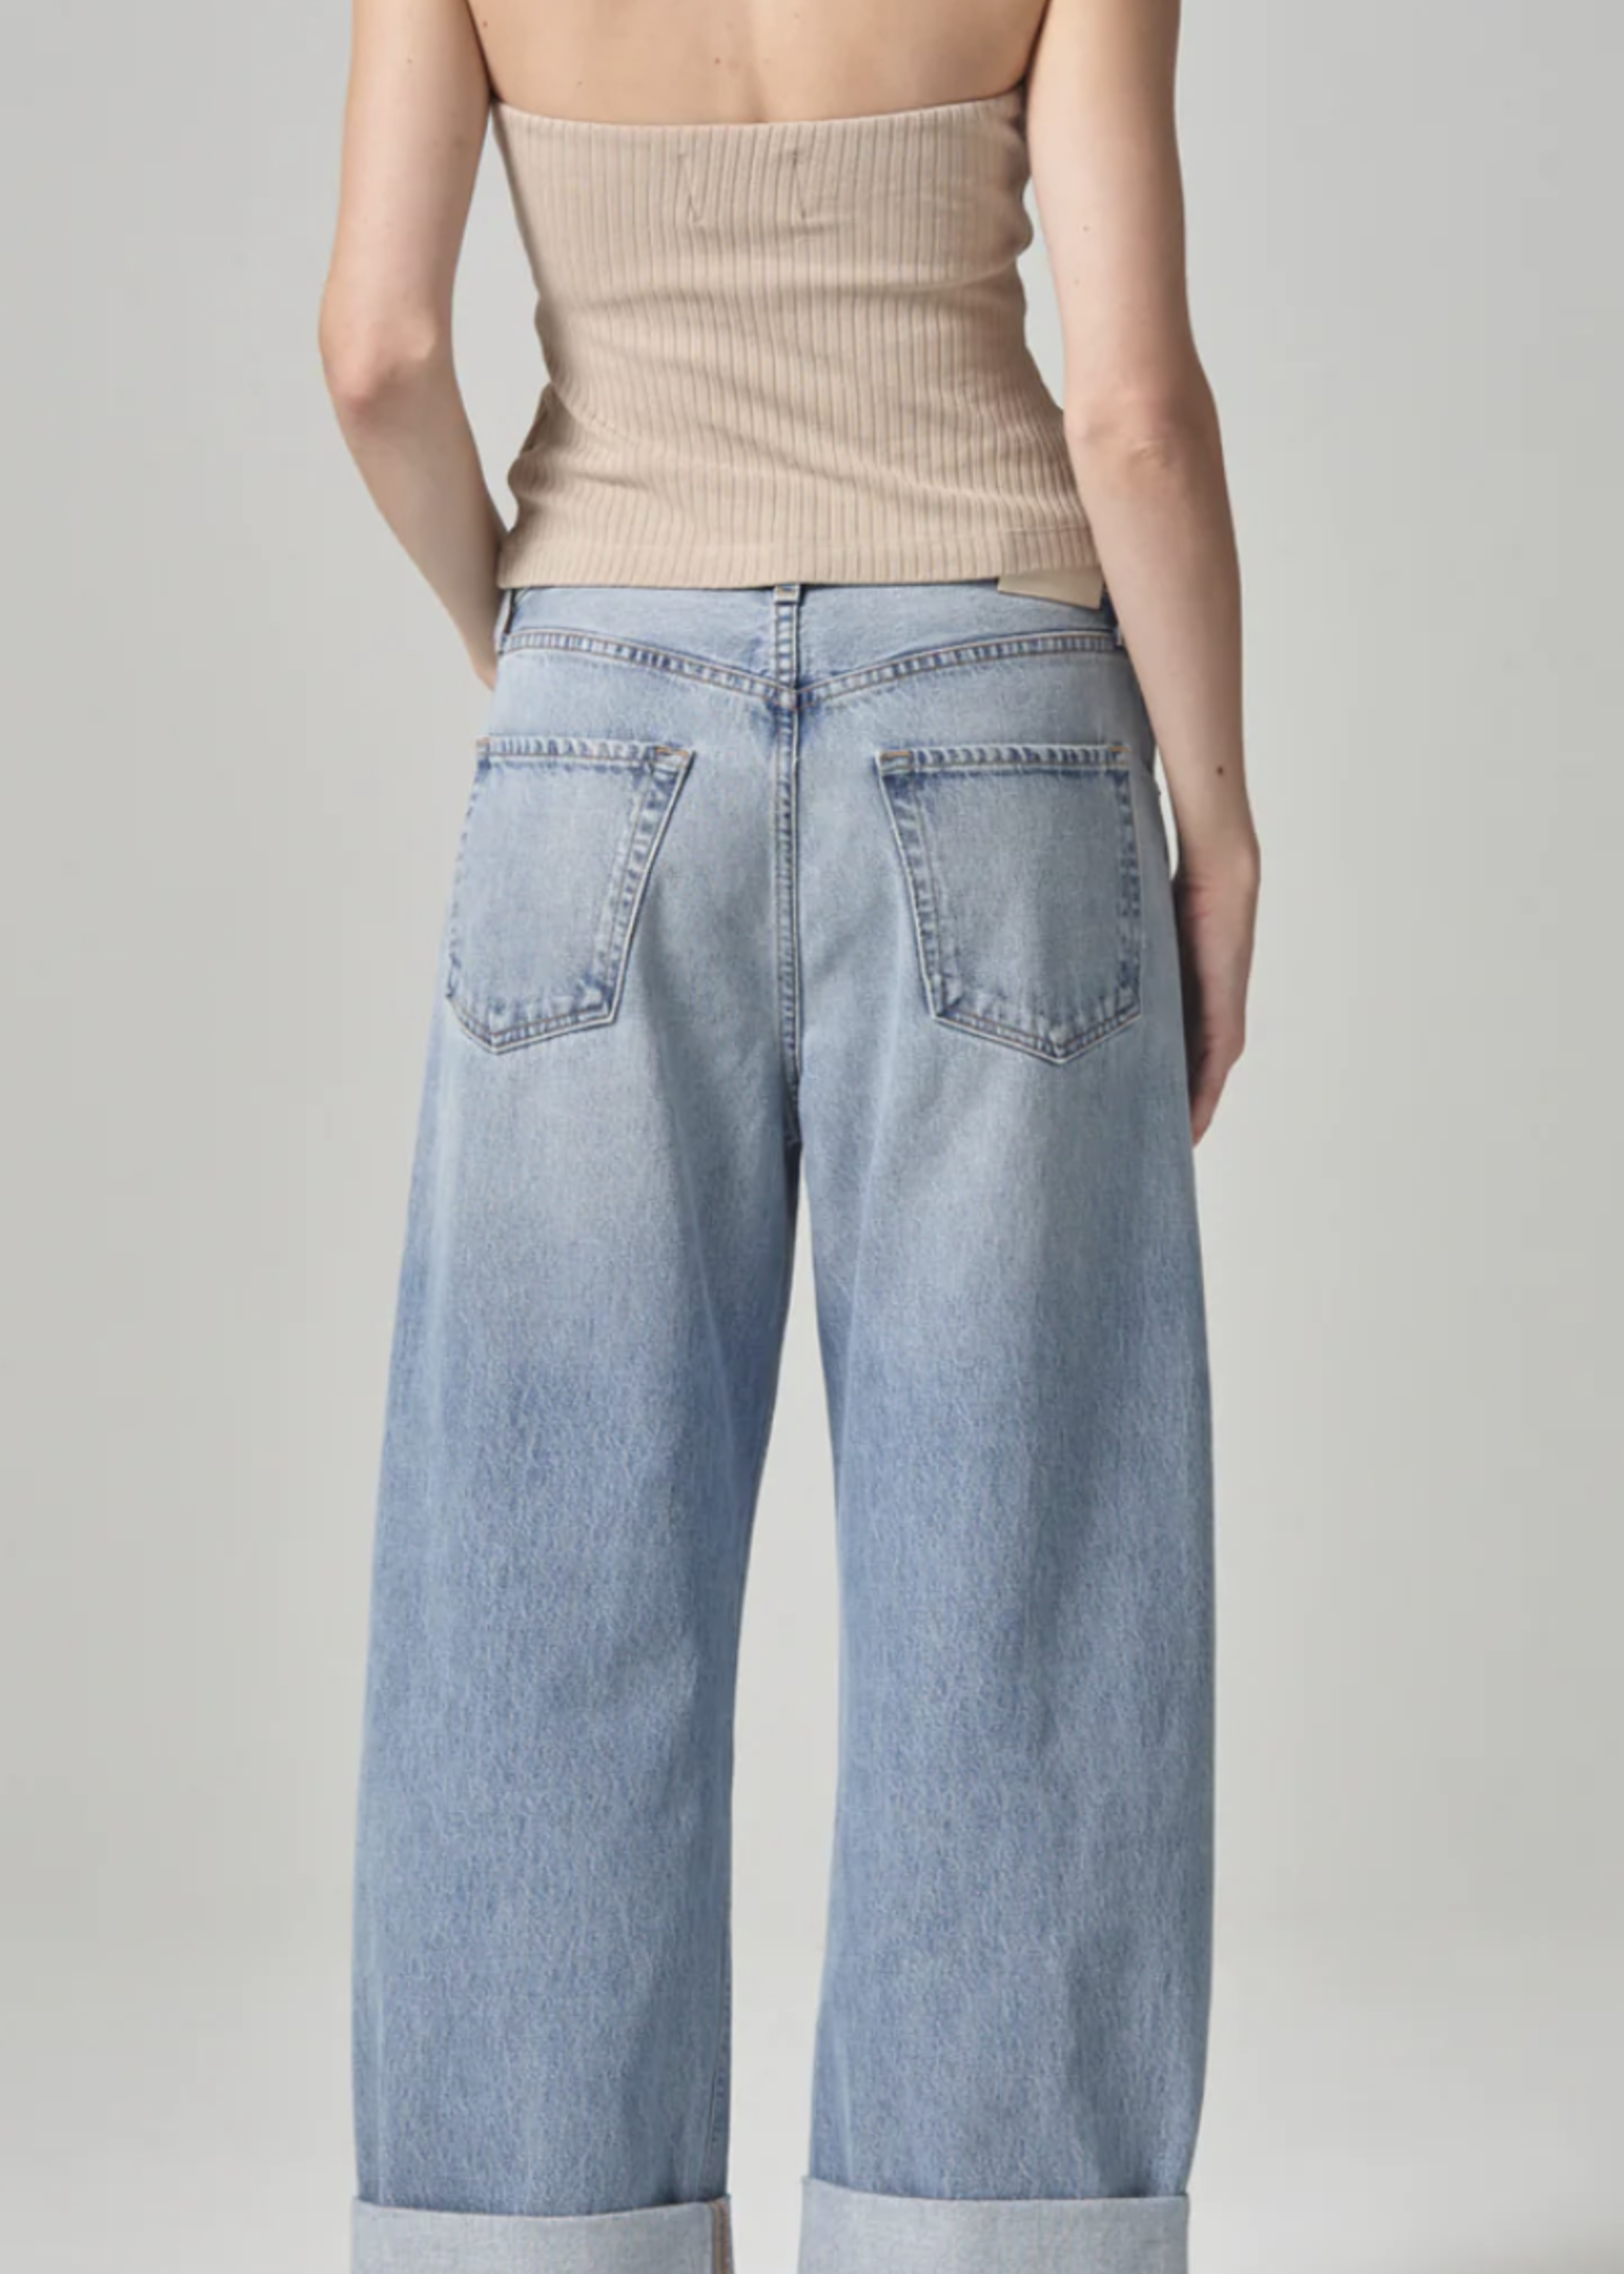 CITIZENS OF HUMANITY AYLA BAGGY CUFFED CROP